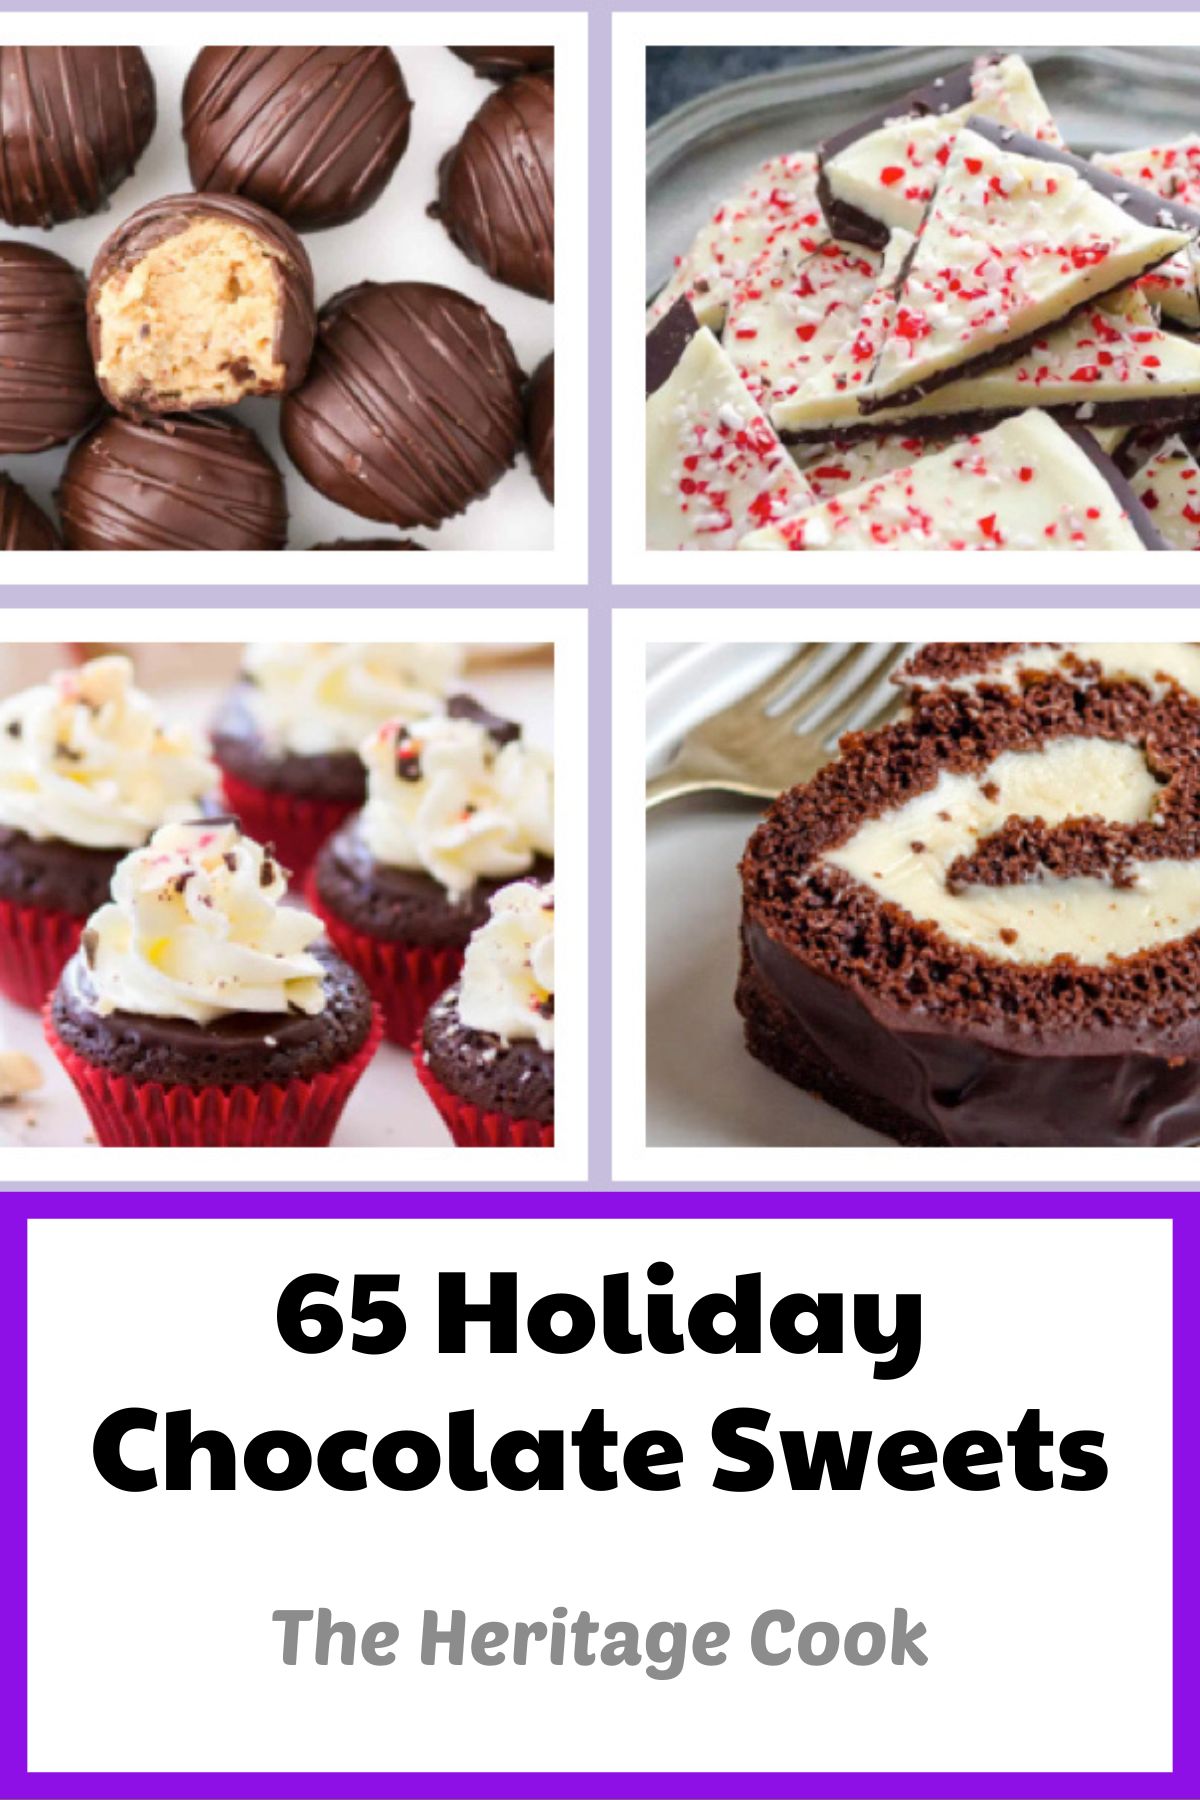 Collection of 65 chocolate holiday sweet recipes, assembled by Jane Bonacci, The Heritage Cook. 